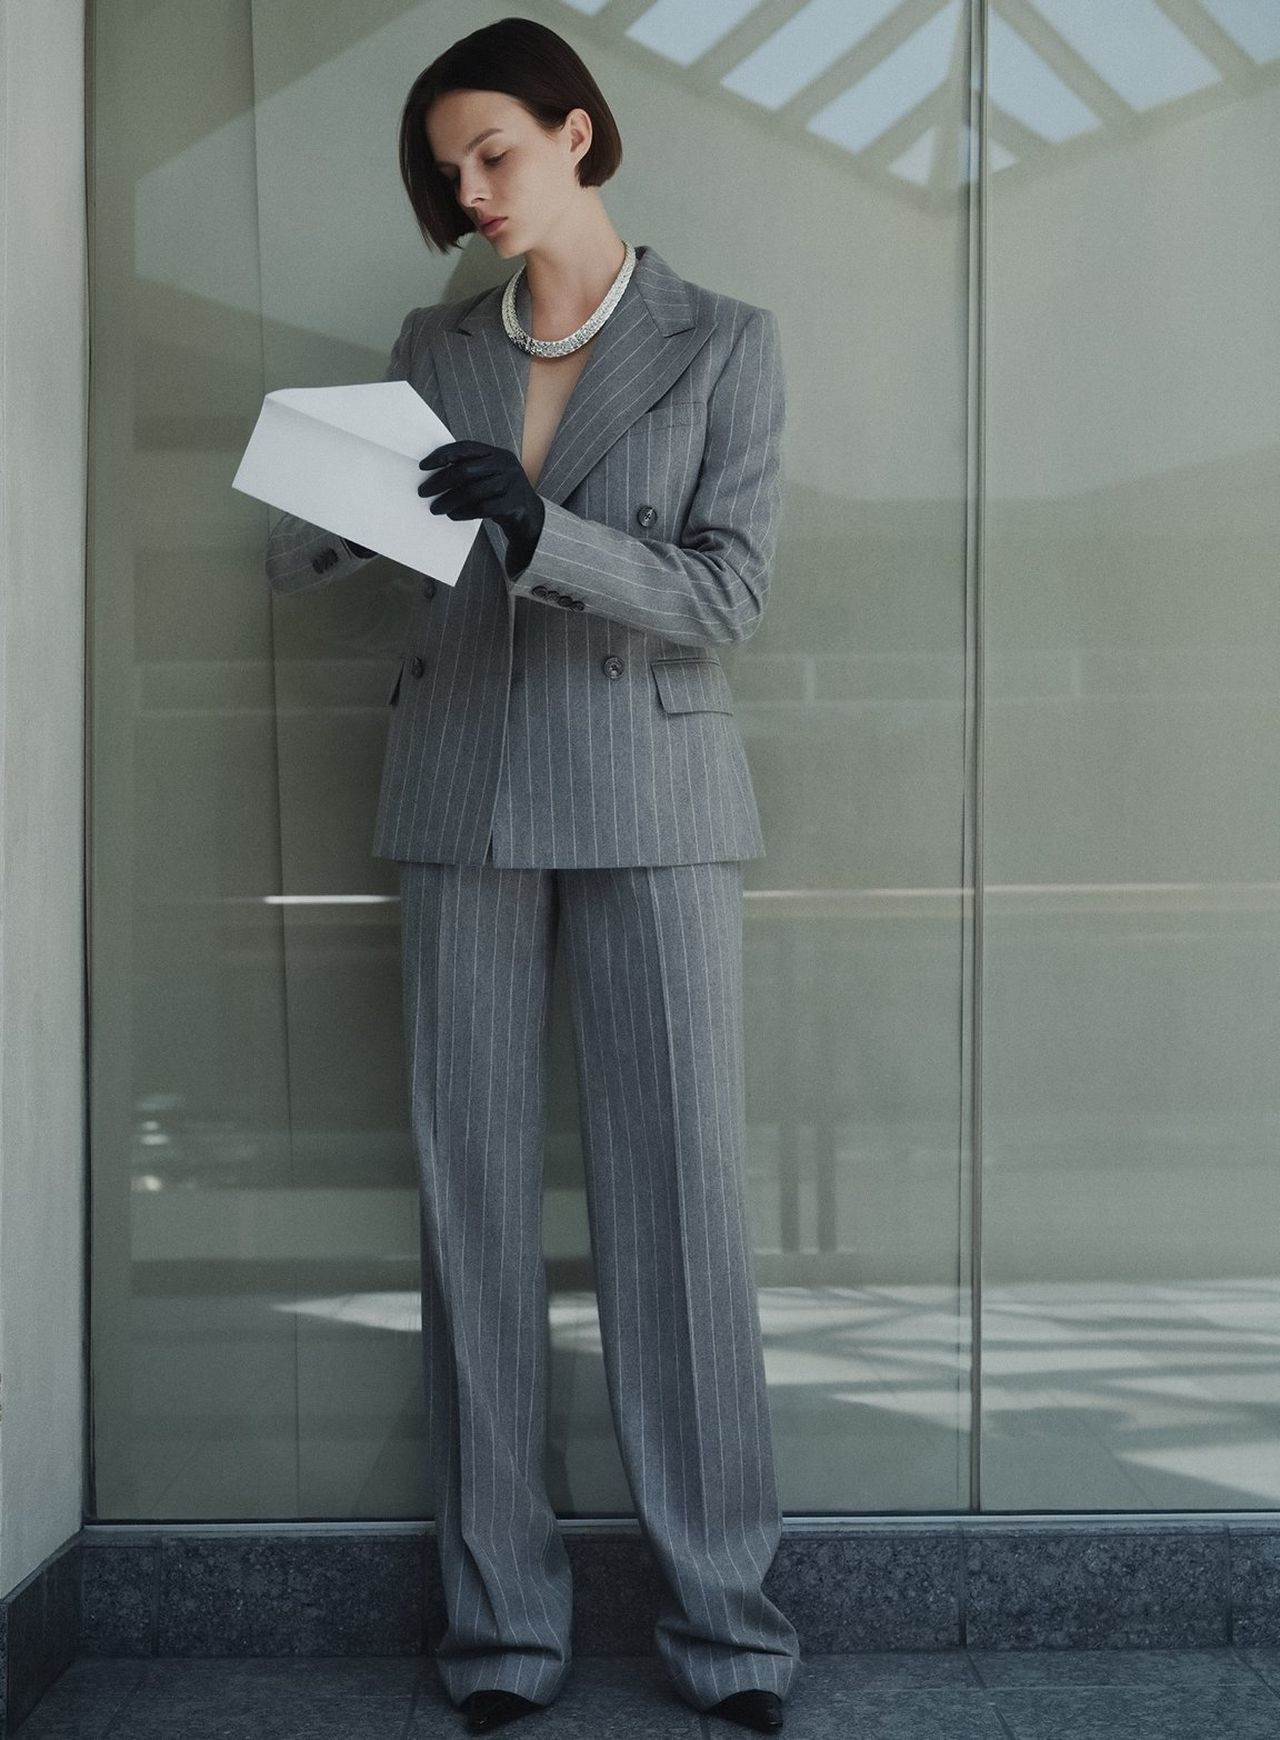 Aylah Peterson In Suits You Editorial